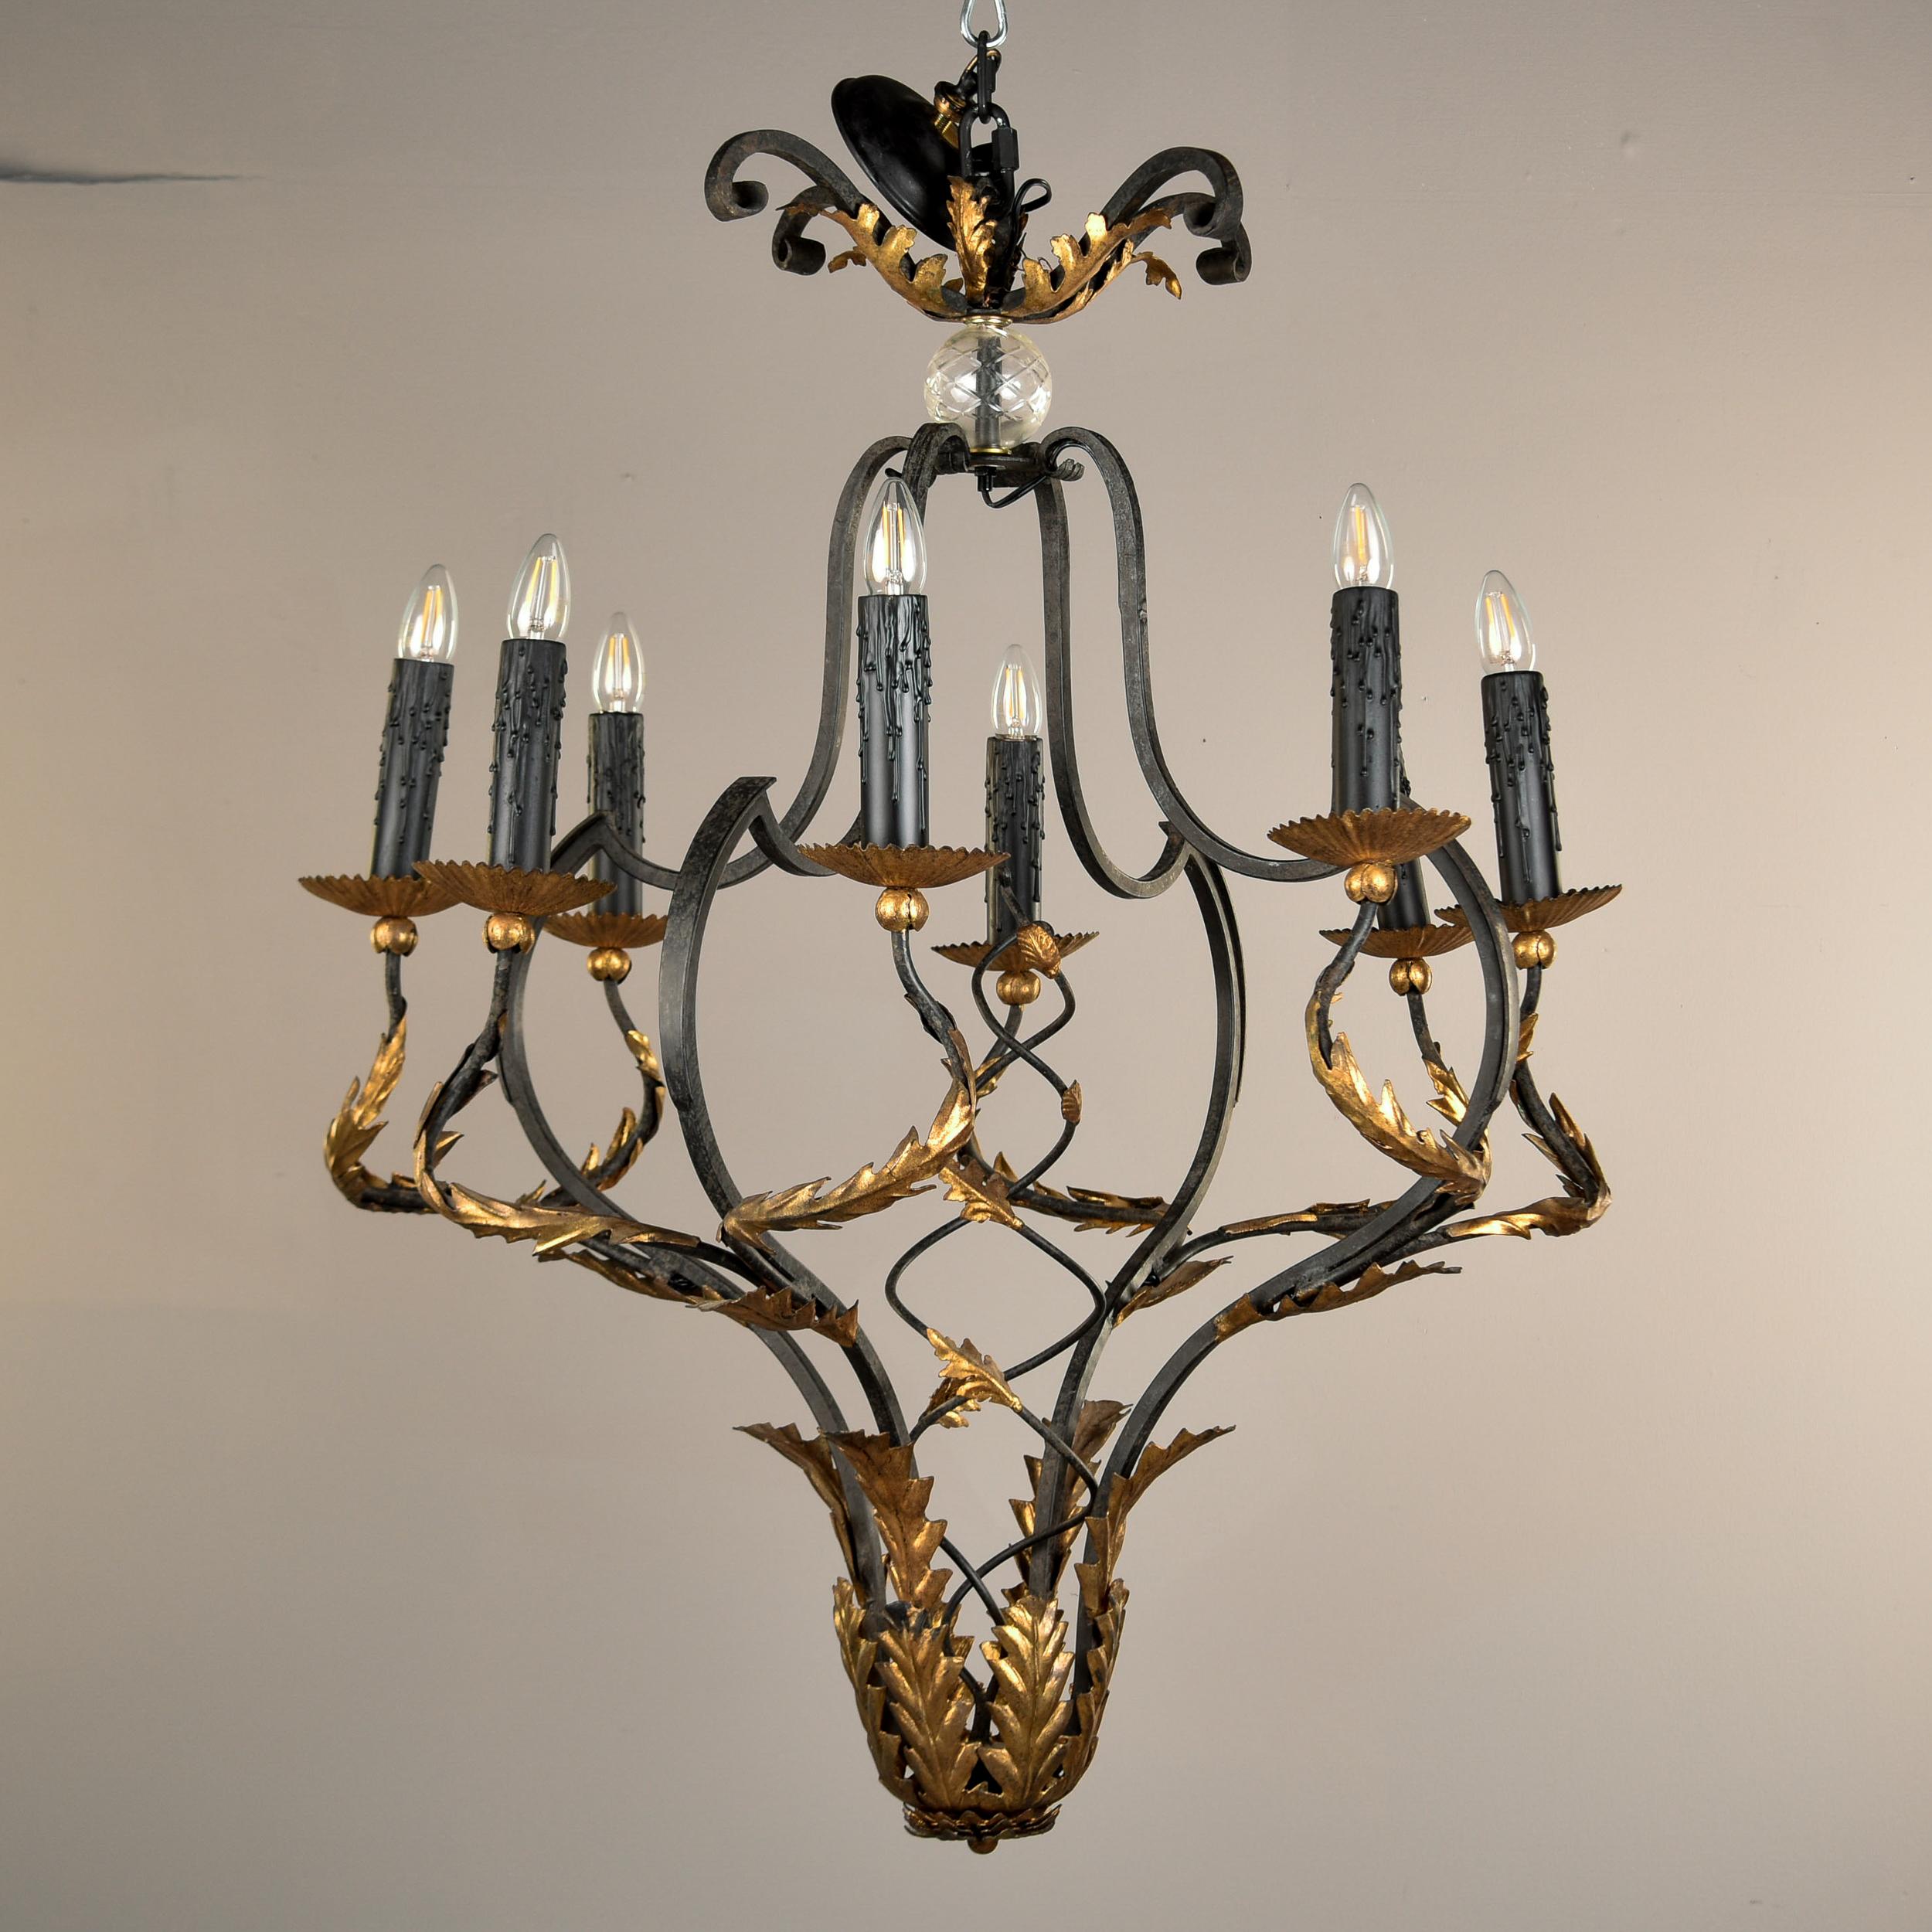 Vintage Italian Black and Gilt Tole Eight Light Chandelier In Good Condition For Sale In Troy, MI